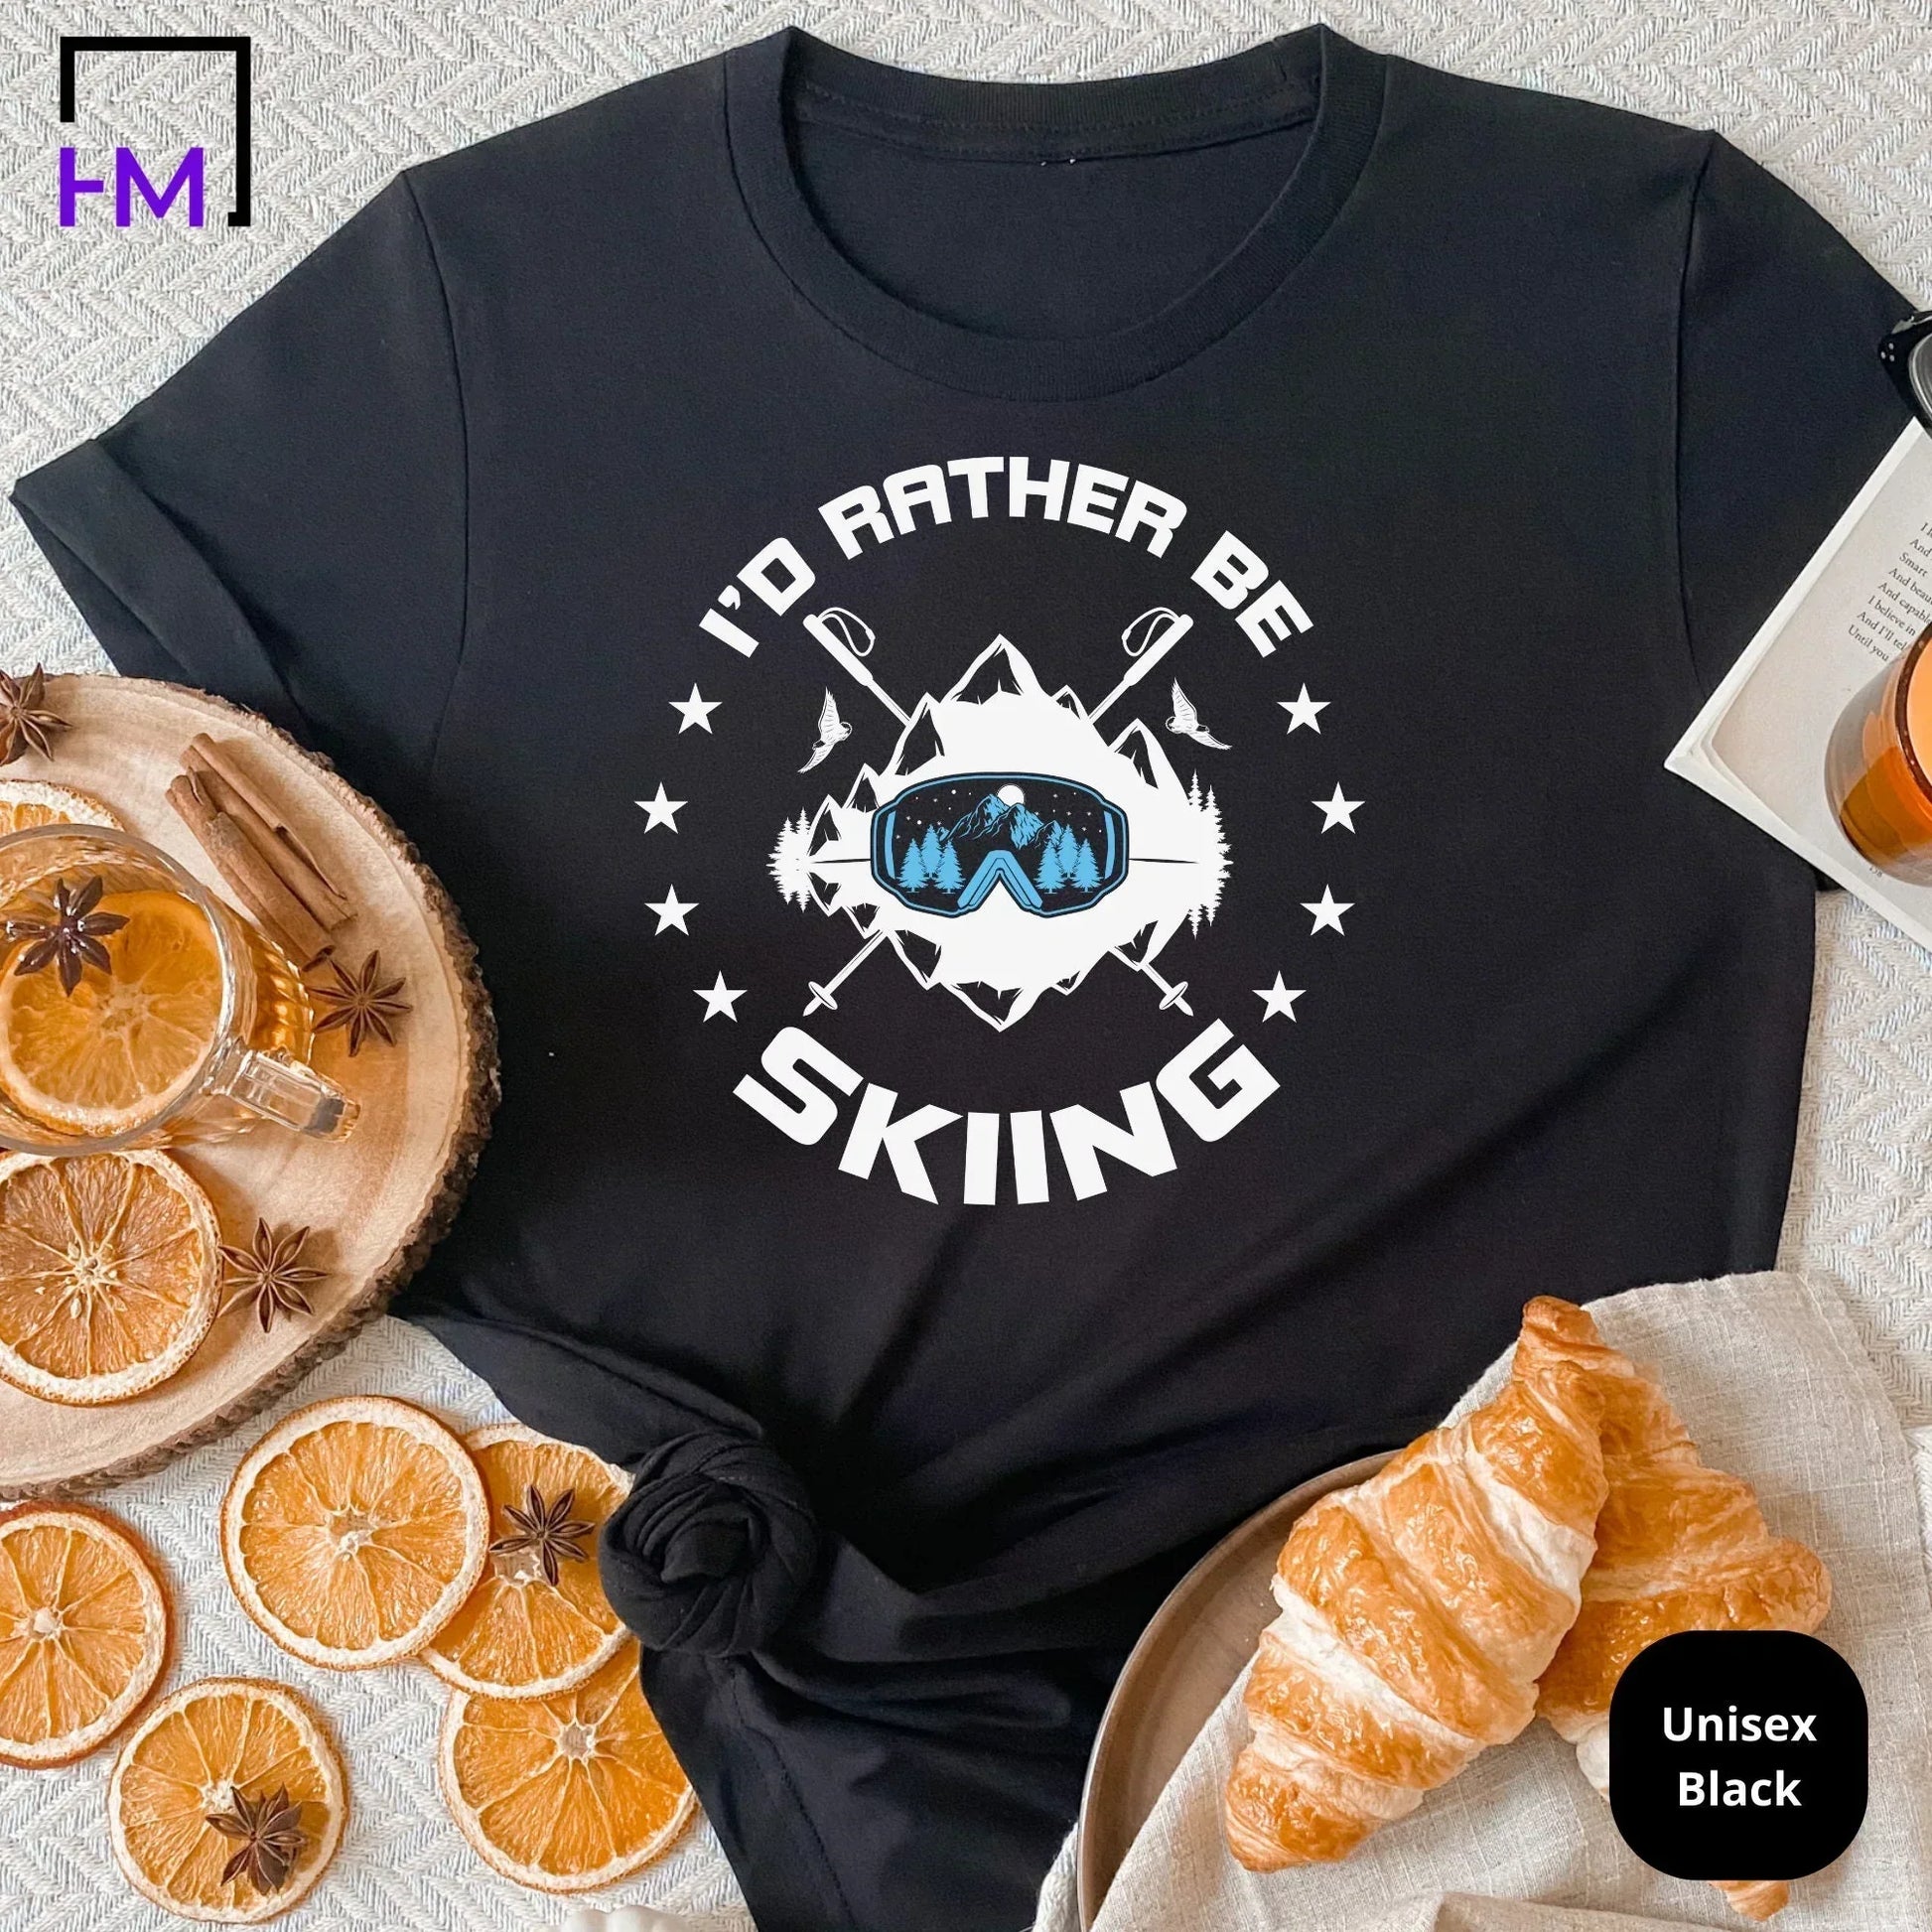 Skiing Shirt | Great for Retired Sports Enthusiast, New Skiers Women/Men, Beginners Experts, Future Ski Lovers | Holiday, Birthday Xmas Gift HMDesignStudioUS